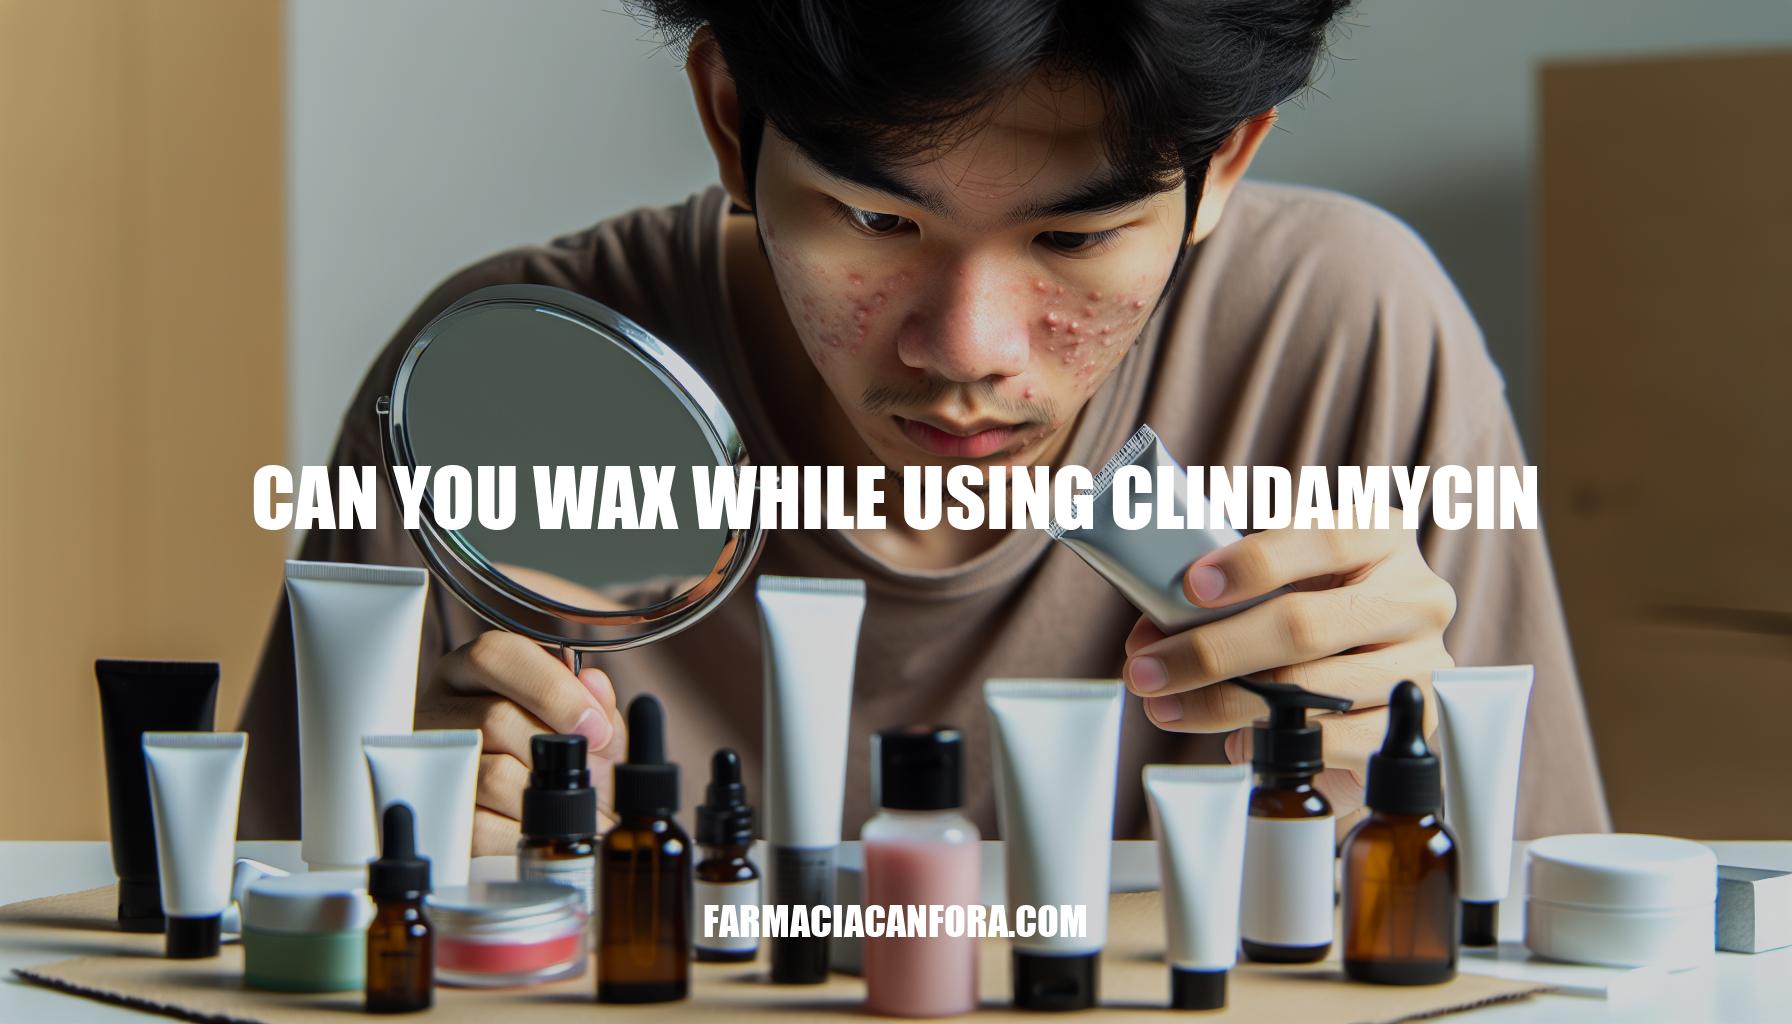 Can You Wax While Using Clindamycin: Important Considerations